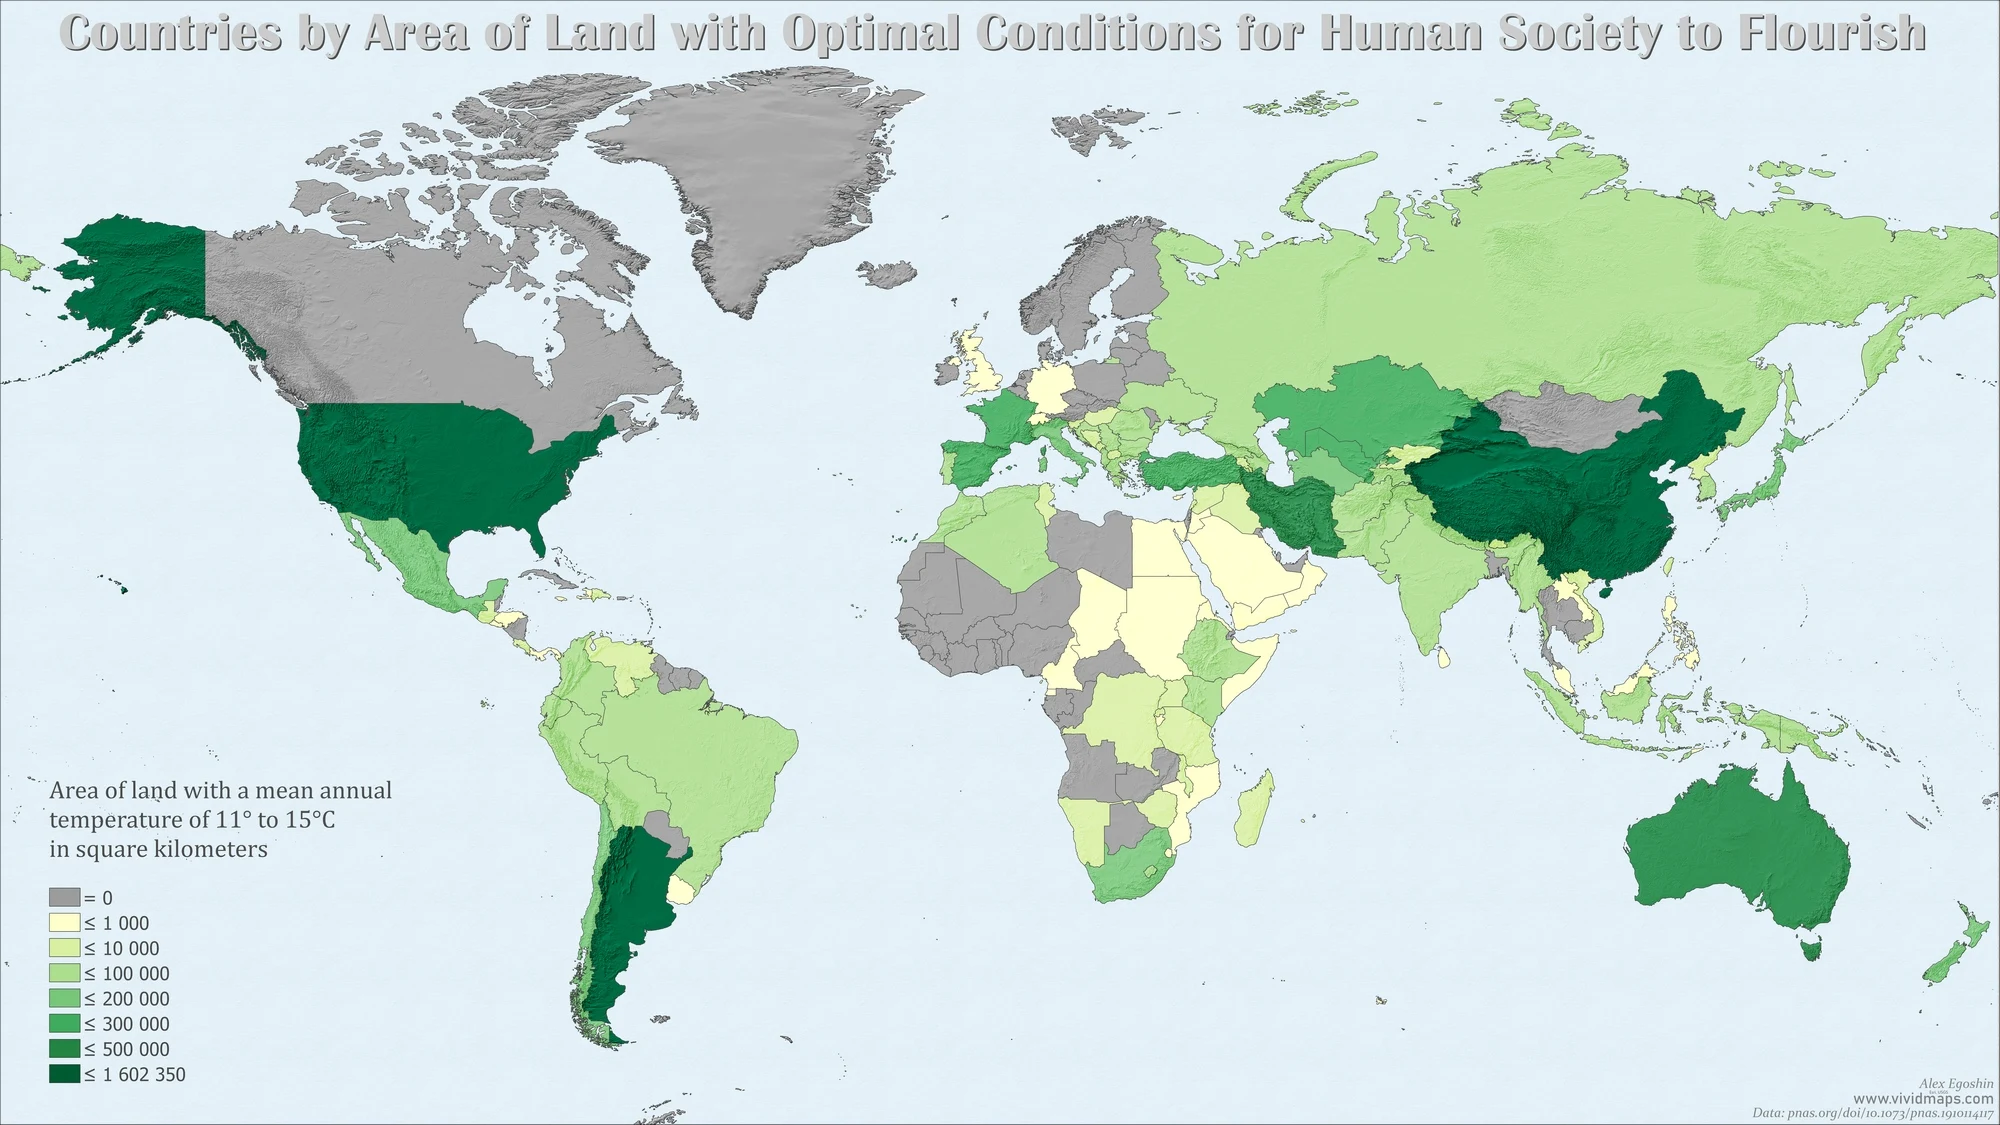 Countries by area of land with optimal conditions for human society to flourish